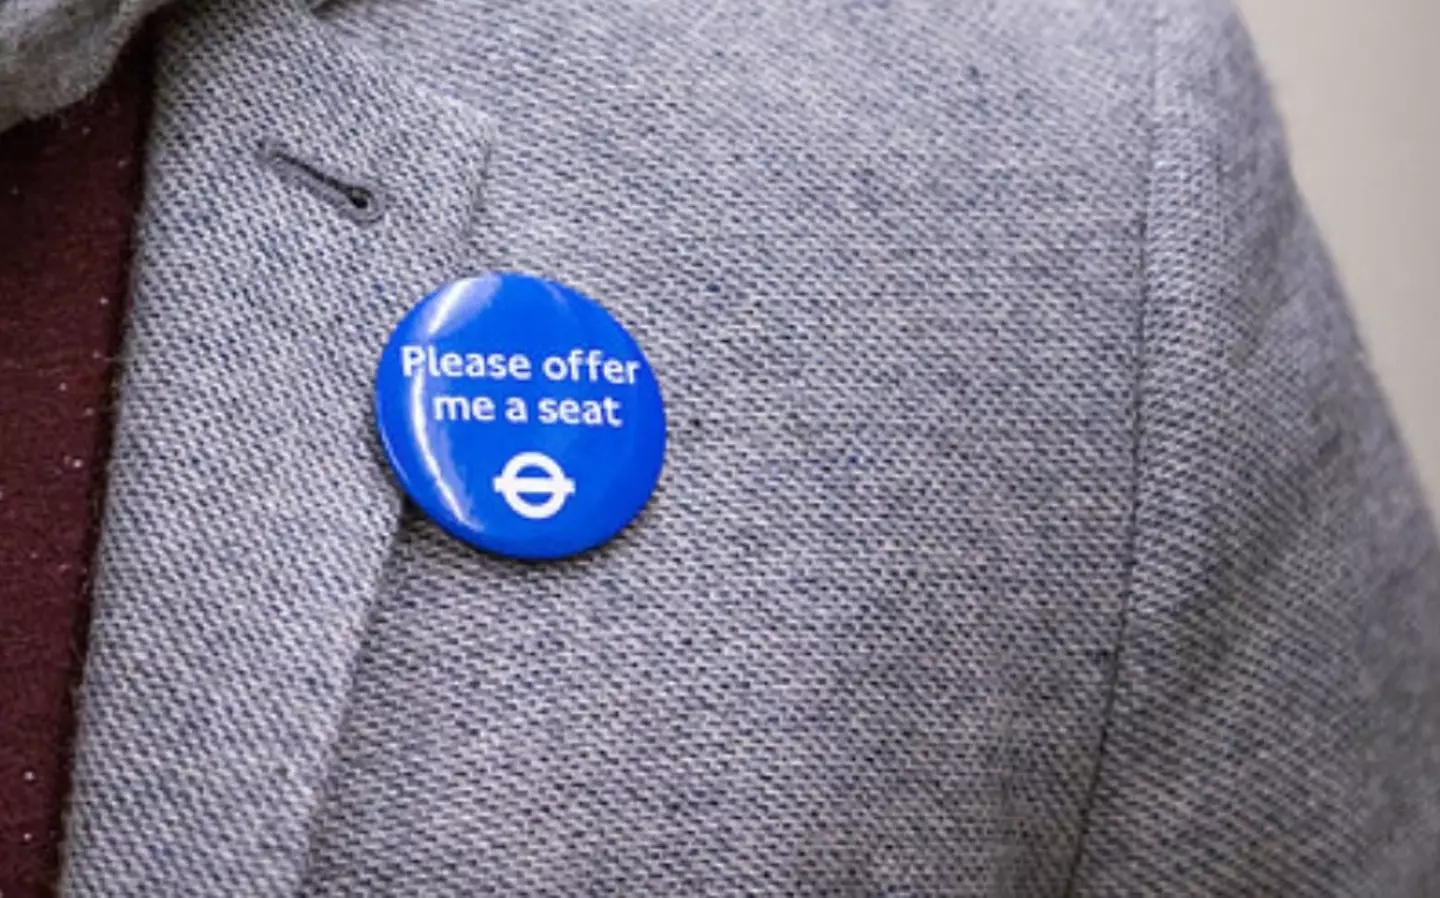 Some public transport operators offer badges for people who need seats even if it isn't immediately obvious.